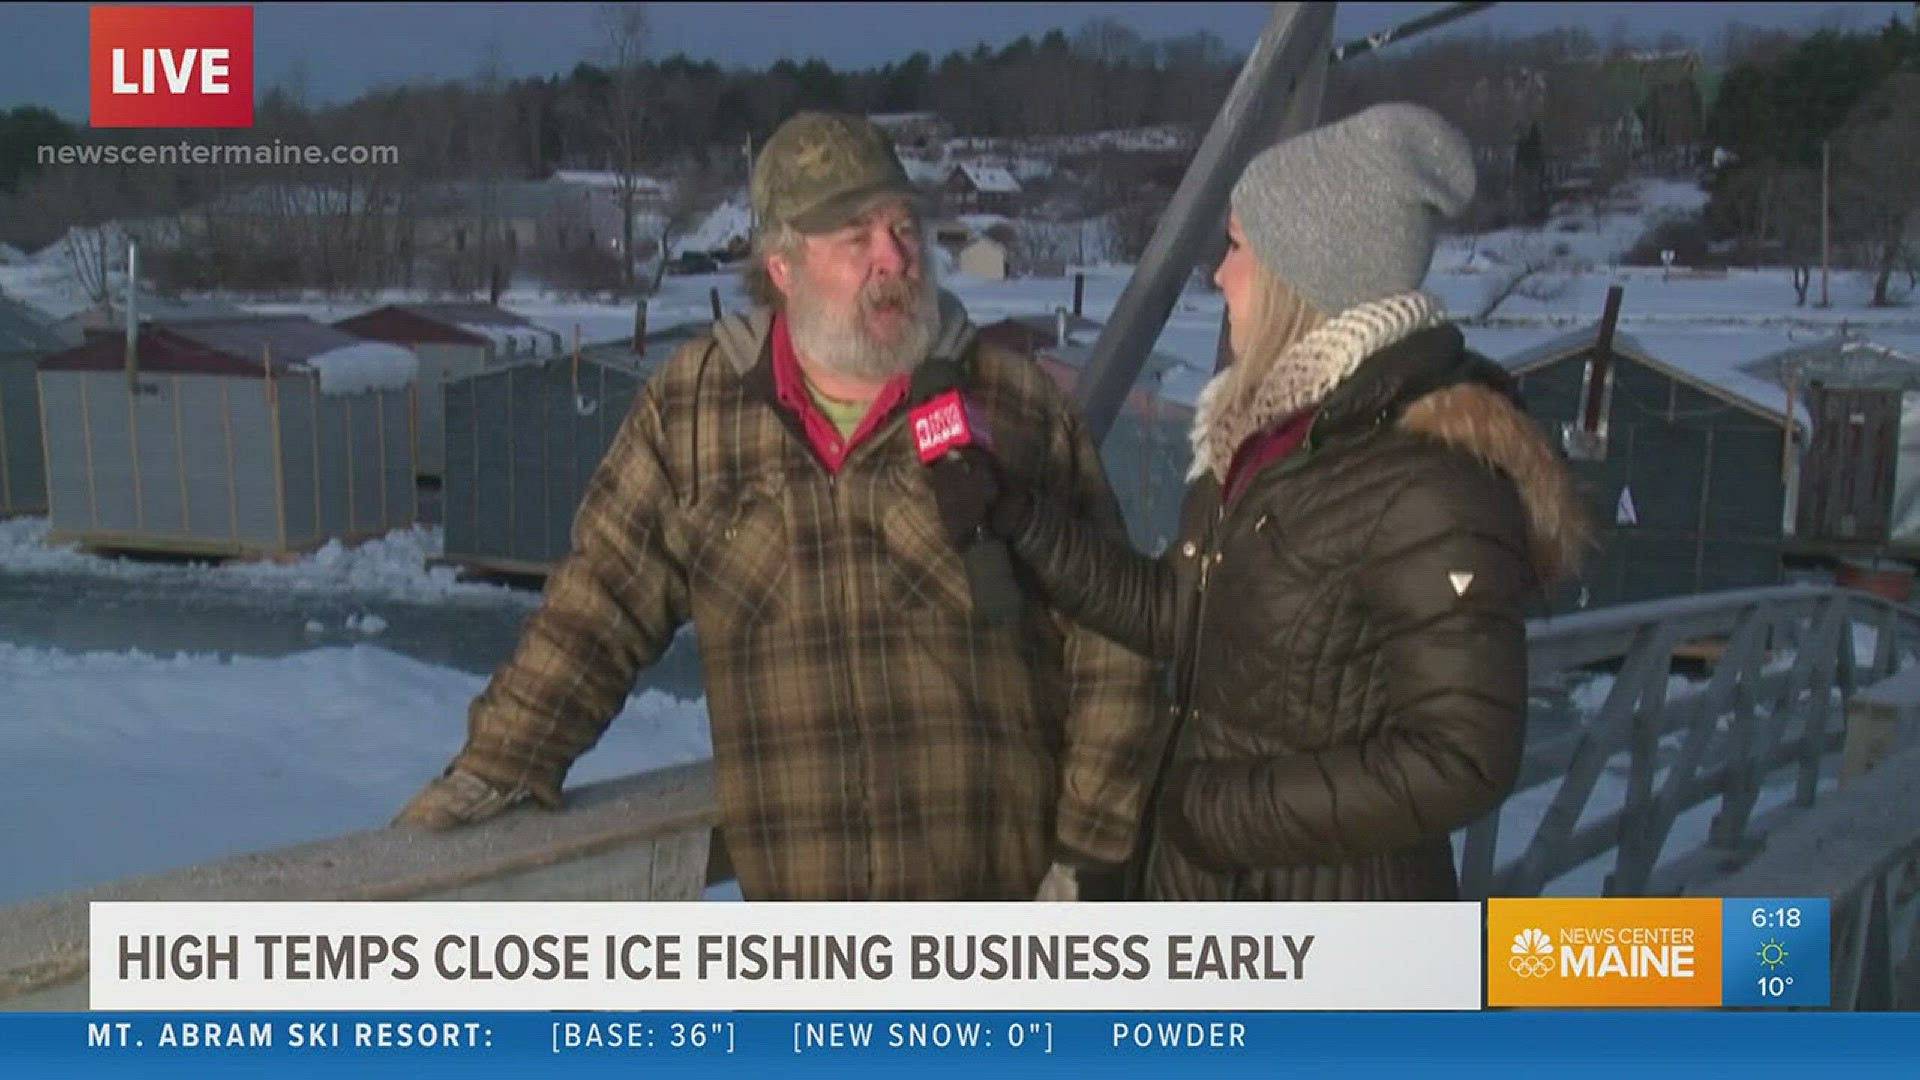 Warm temps coming expected to make ice fishing business unsafe